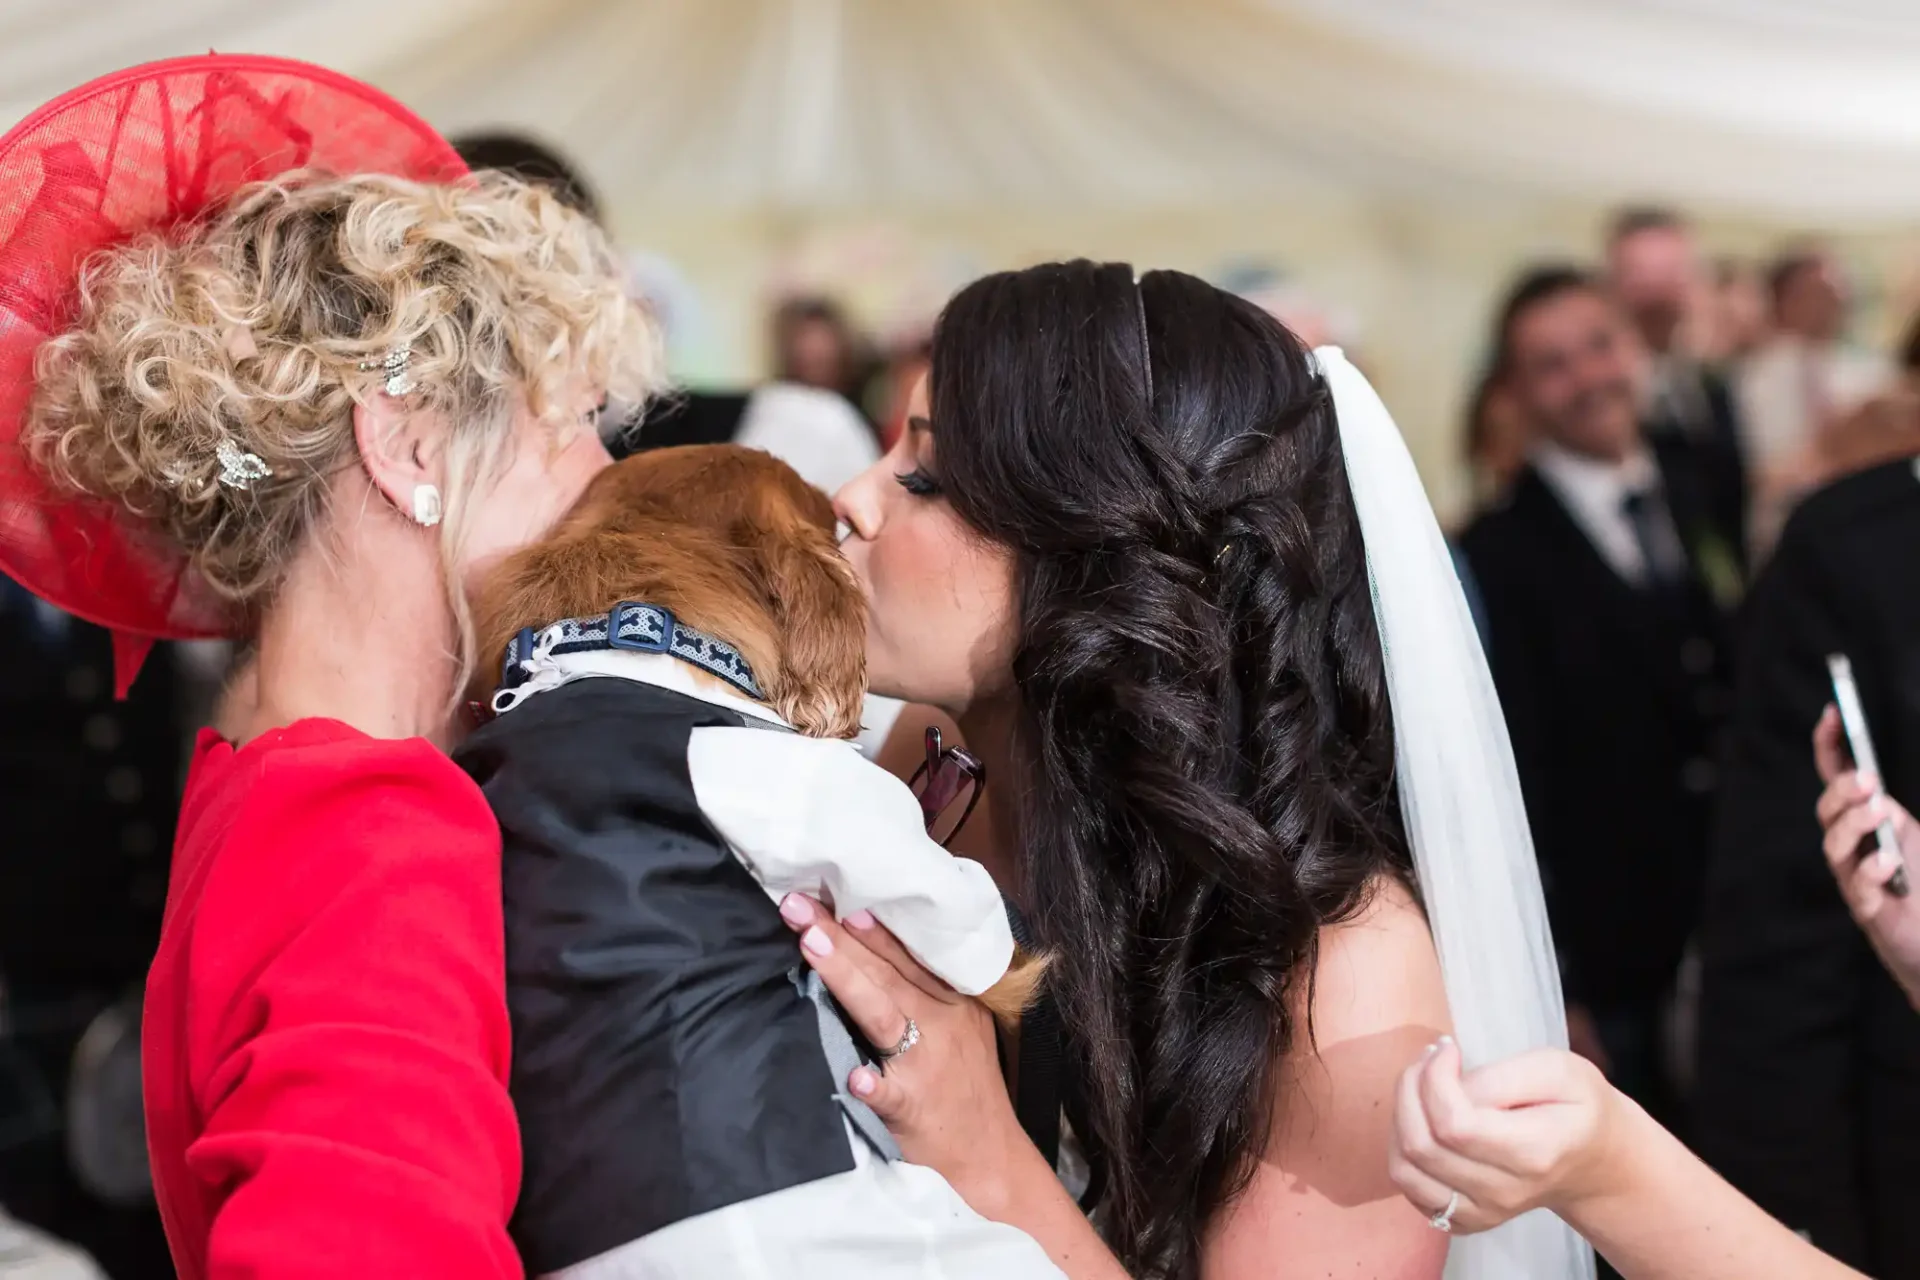 A bride kisses a small dog held by an elderly woman in a red hat at a wedding reception under a white tent.